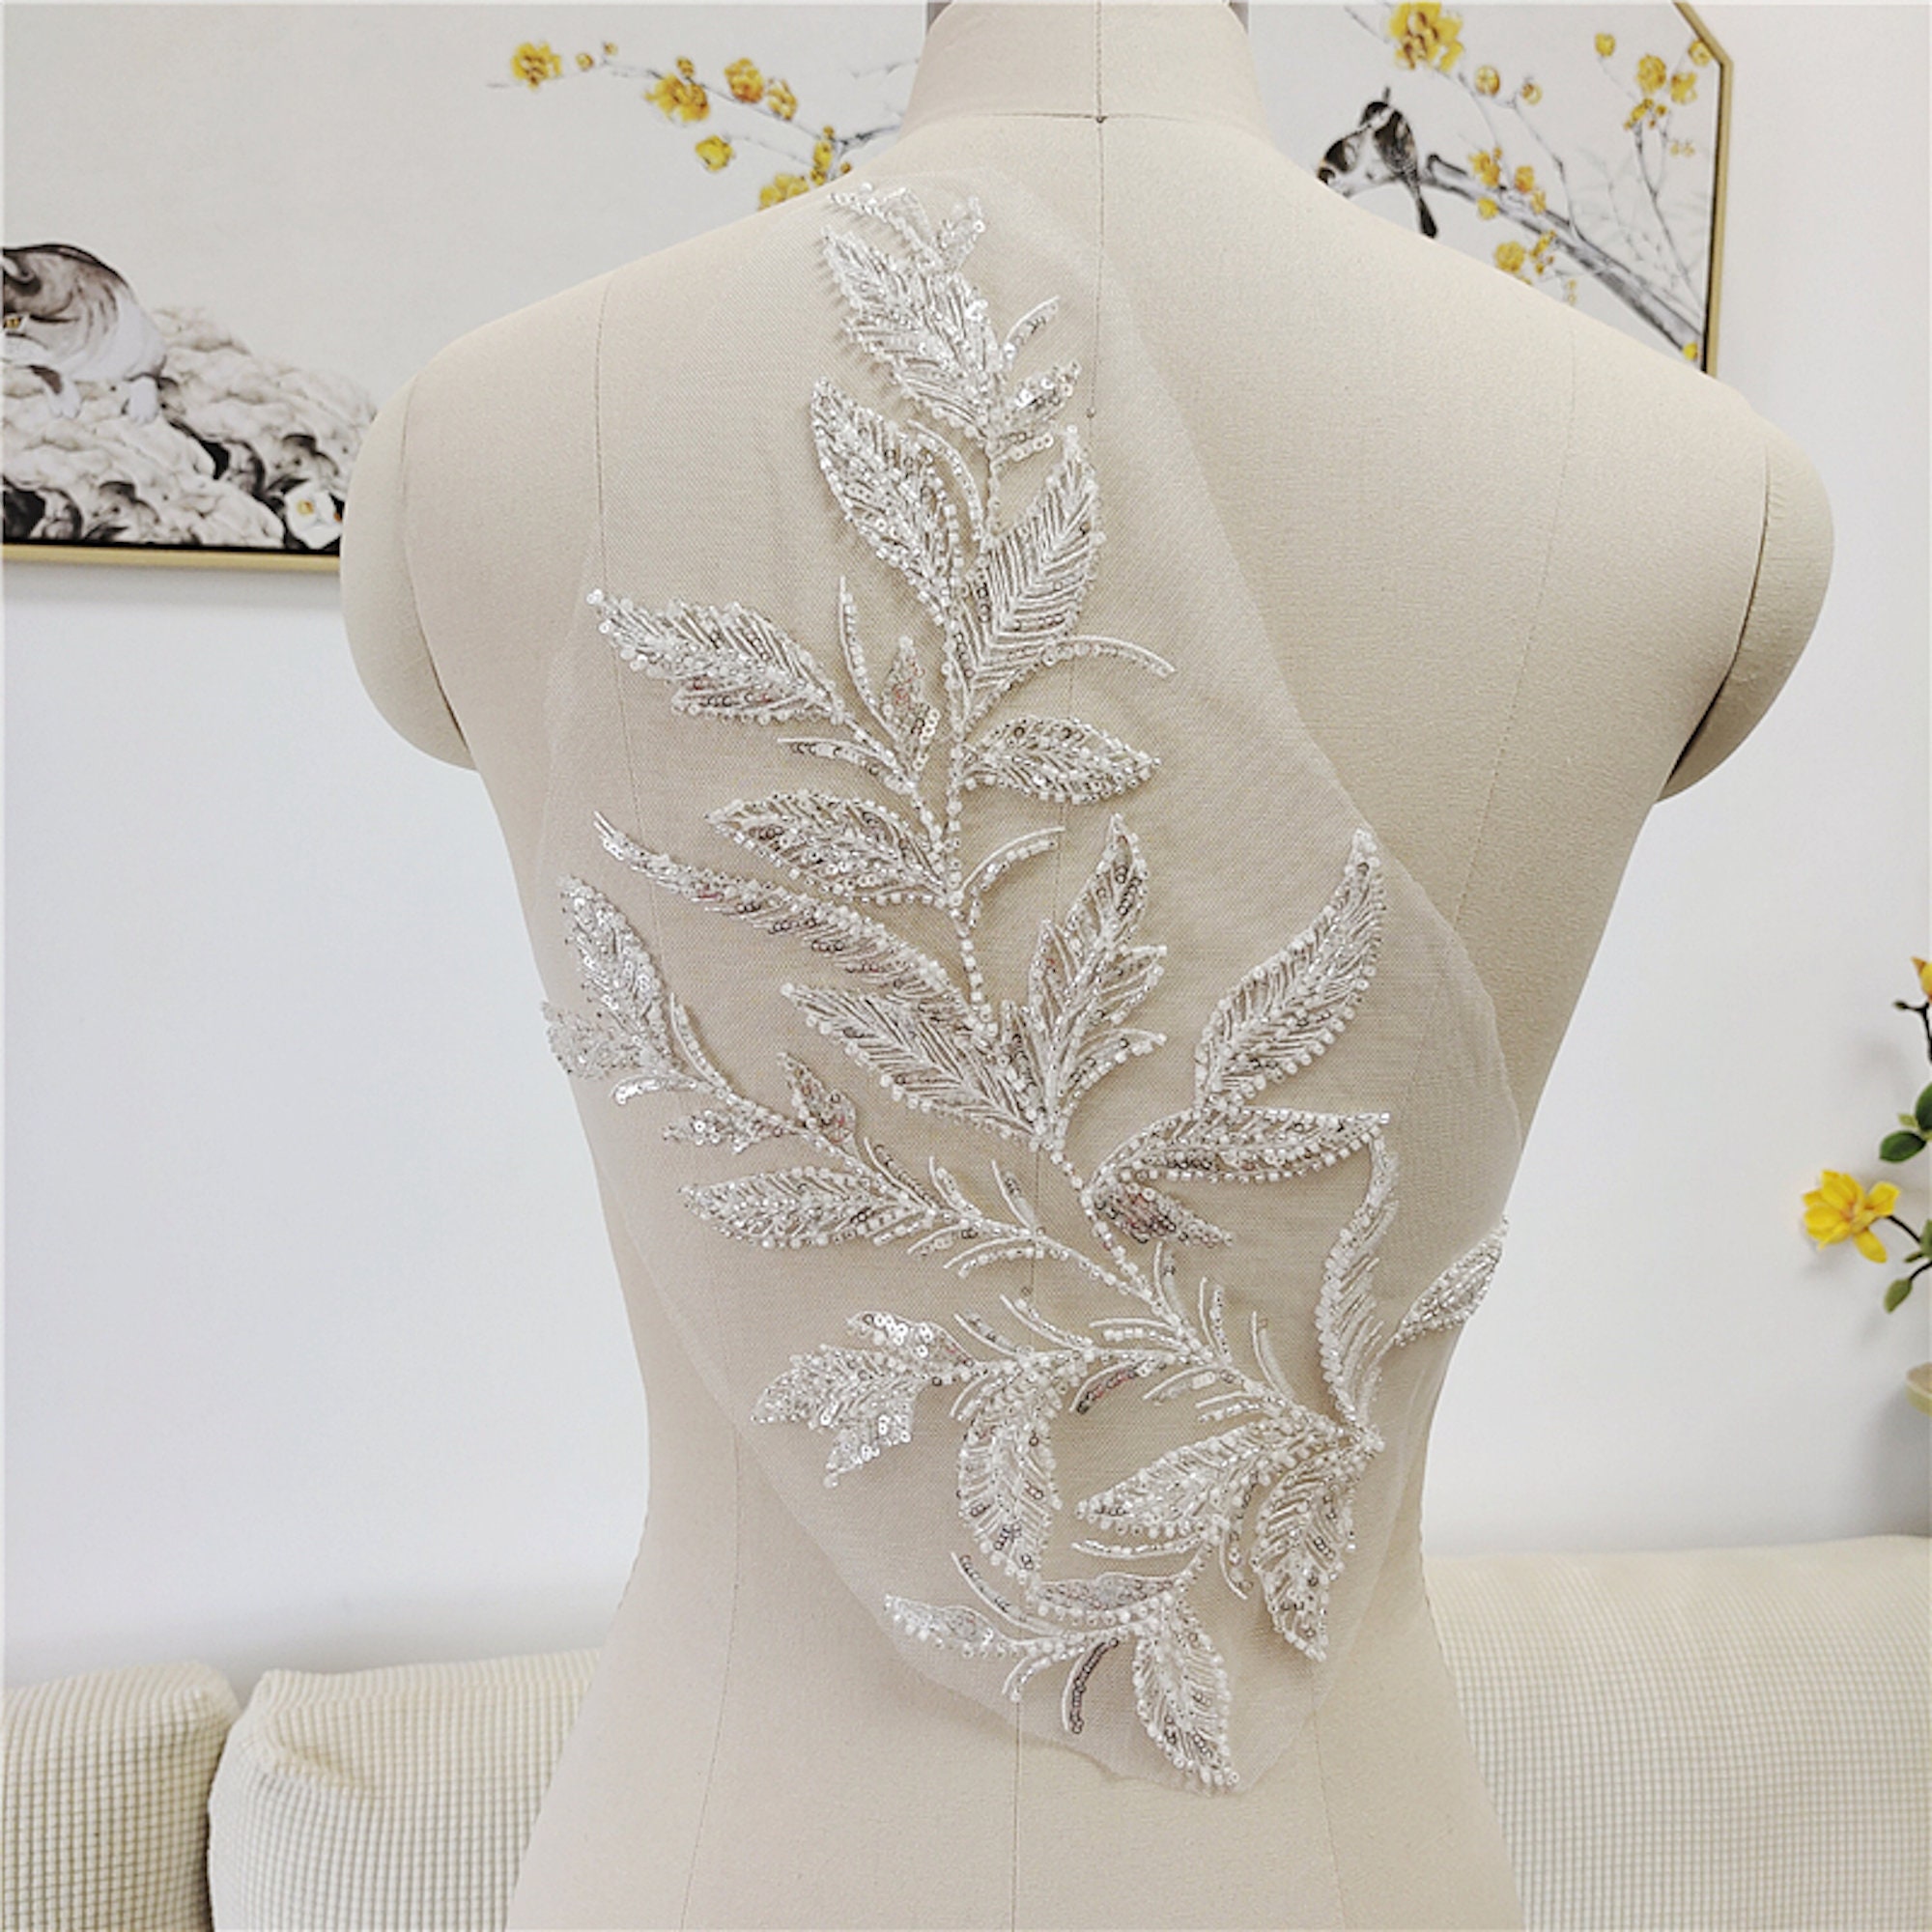 Bridal corded Beaded Lace Applique Embroidery Lace Trim Patches Wedding Motif